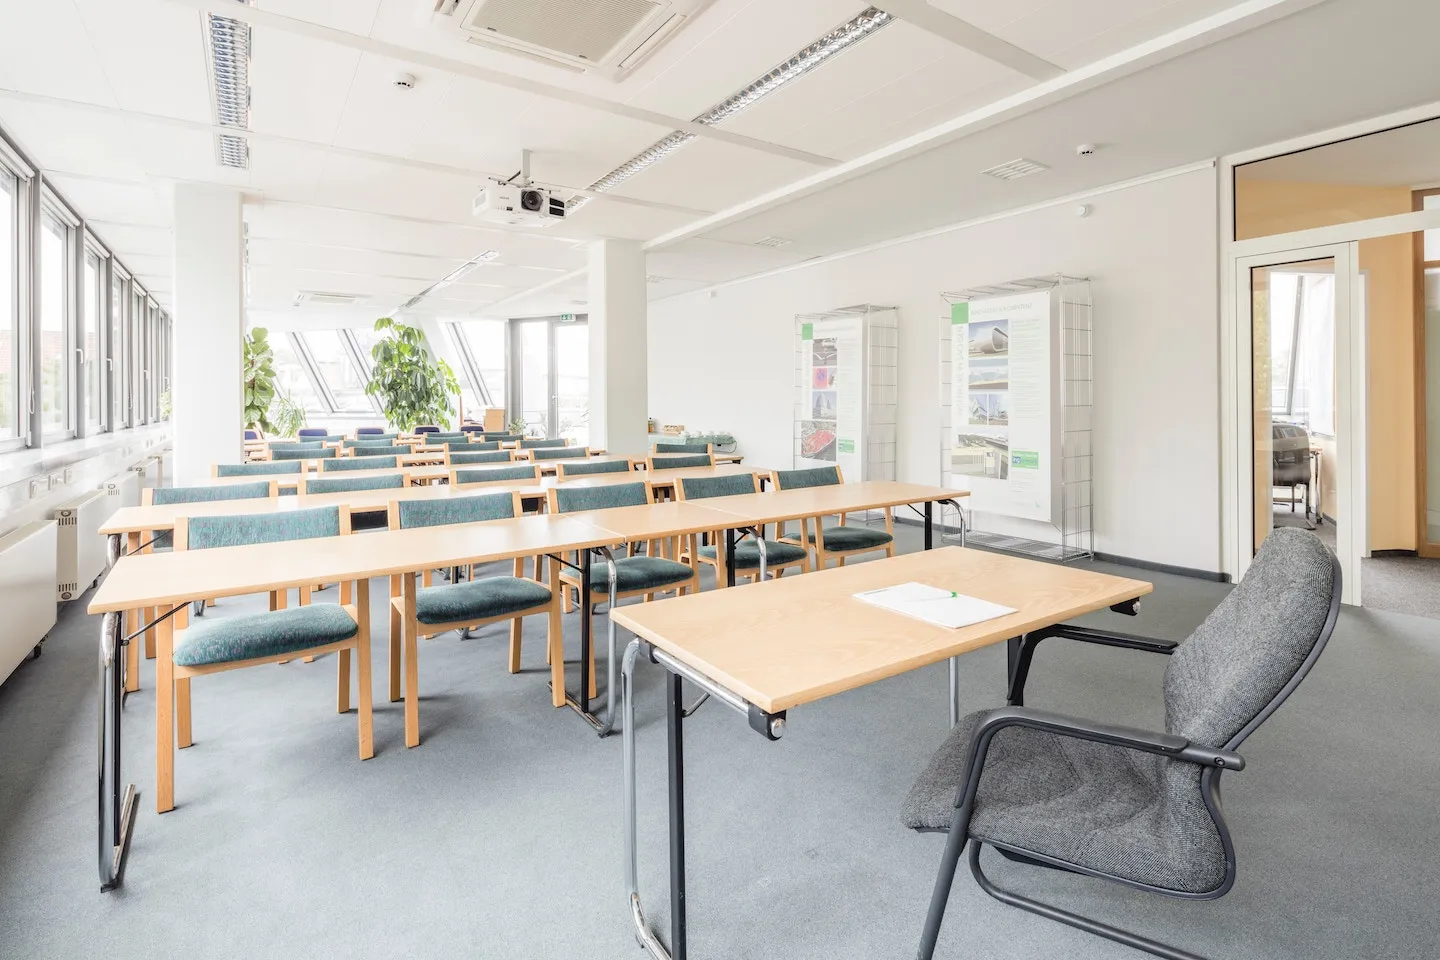 School classroom with commercial fixture installations including overhead lights and projector.